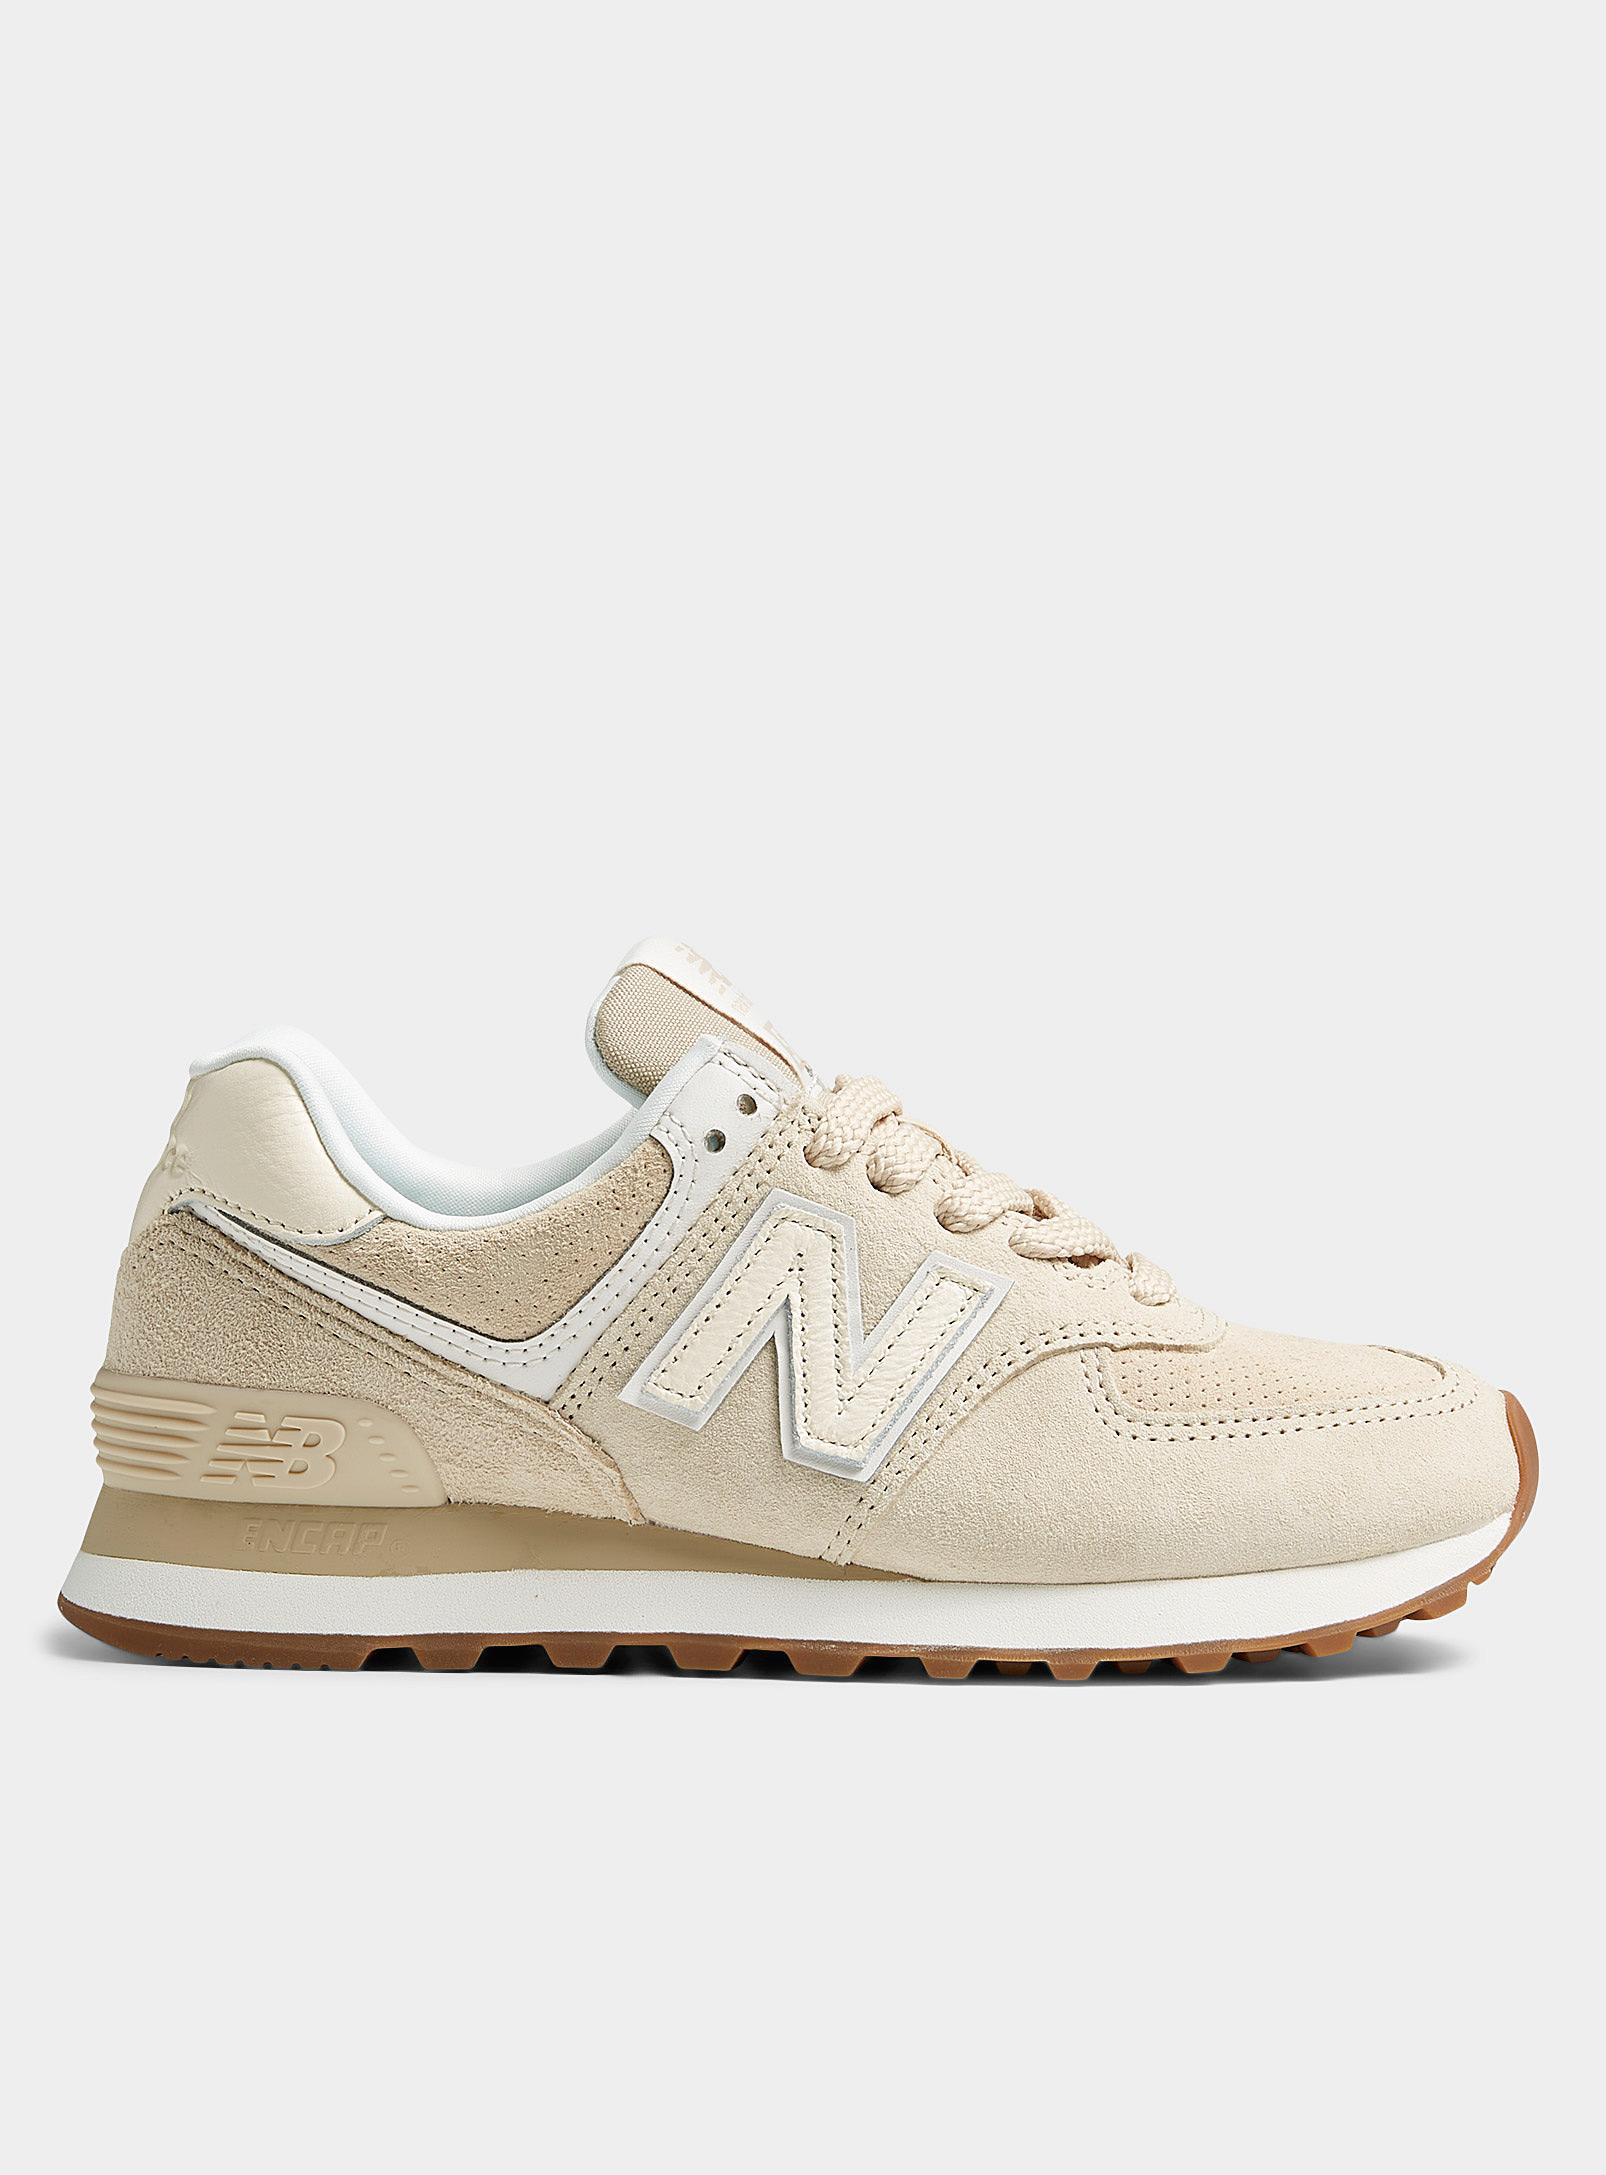 New Balance Beige 574 Sneakers in White Lyst